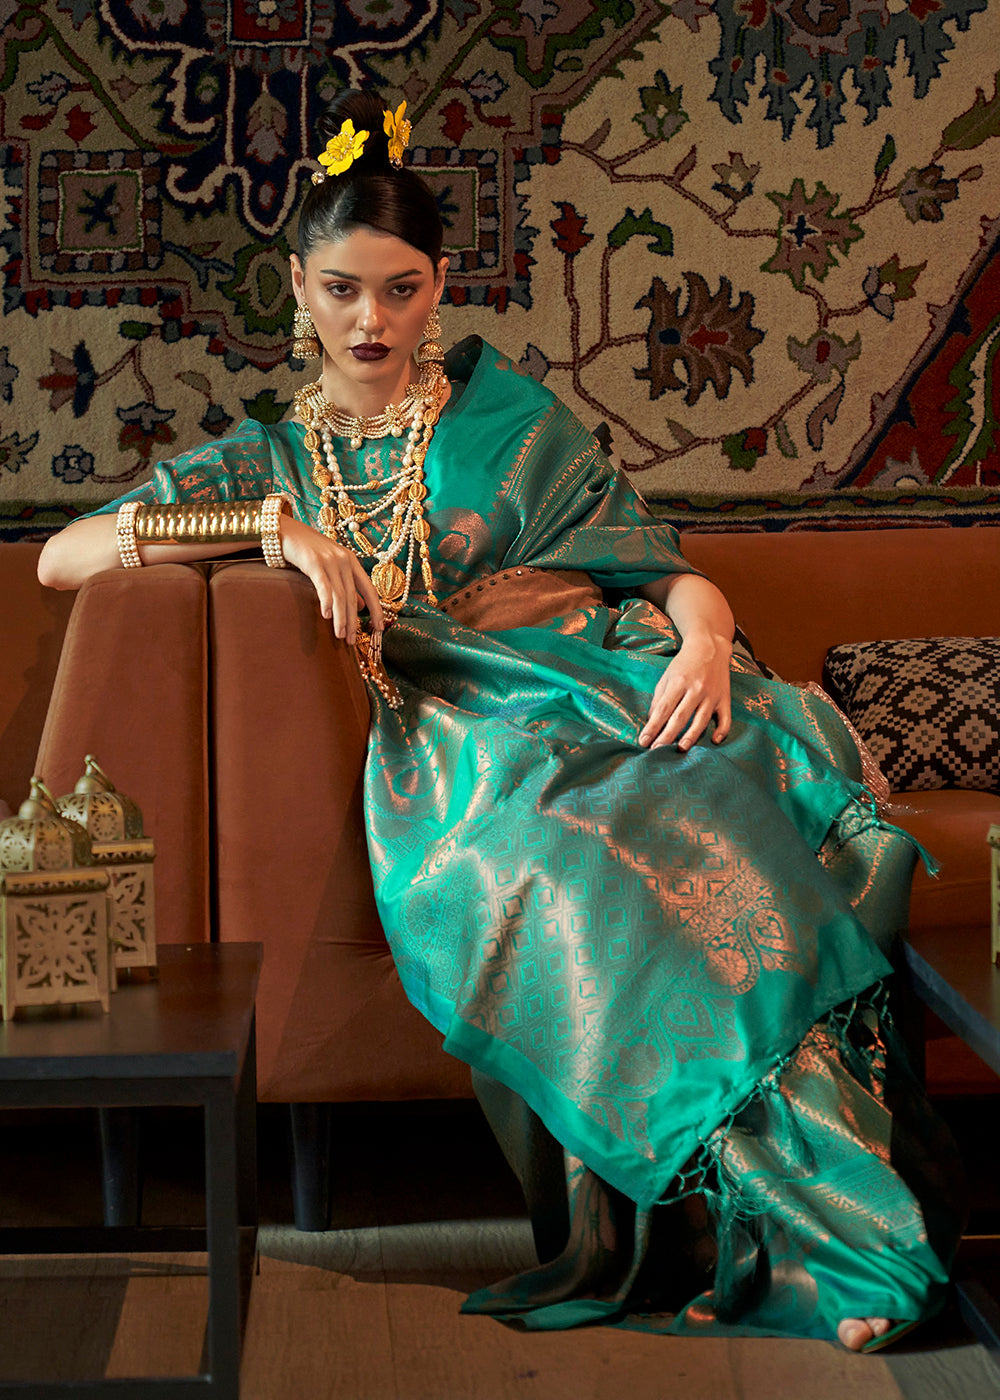 Buy Now Turquoise Blue Blended Woven Zari Brocade Silk Saree Online in USA, UK, Canada & Worldwide at Empress Clothing. 